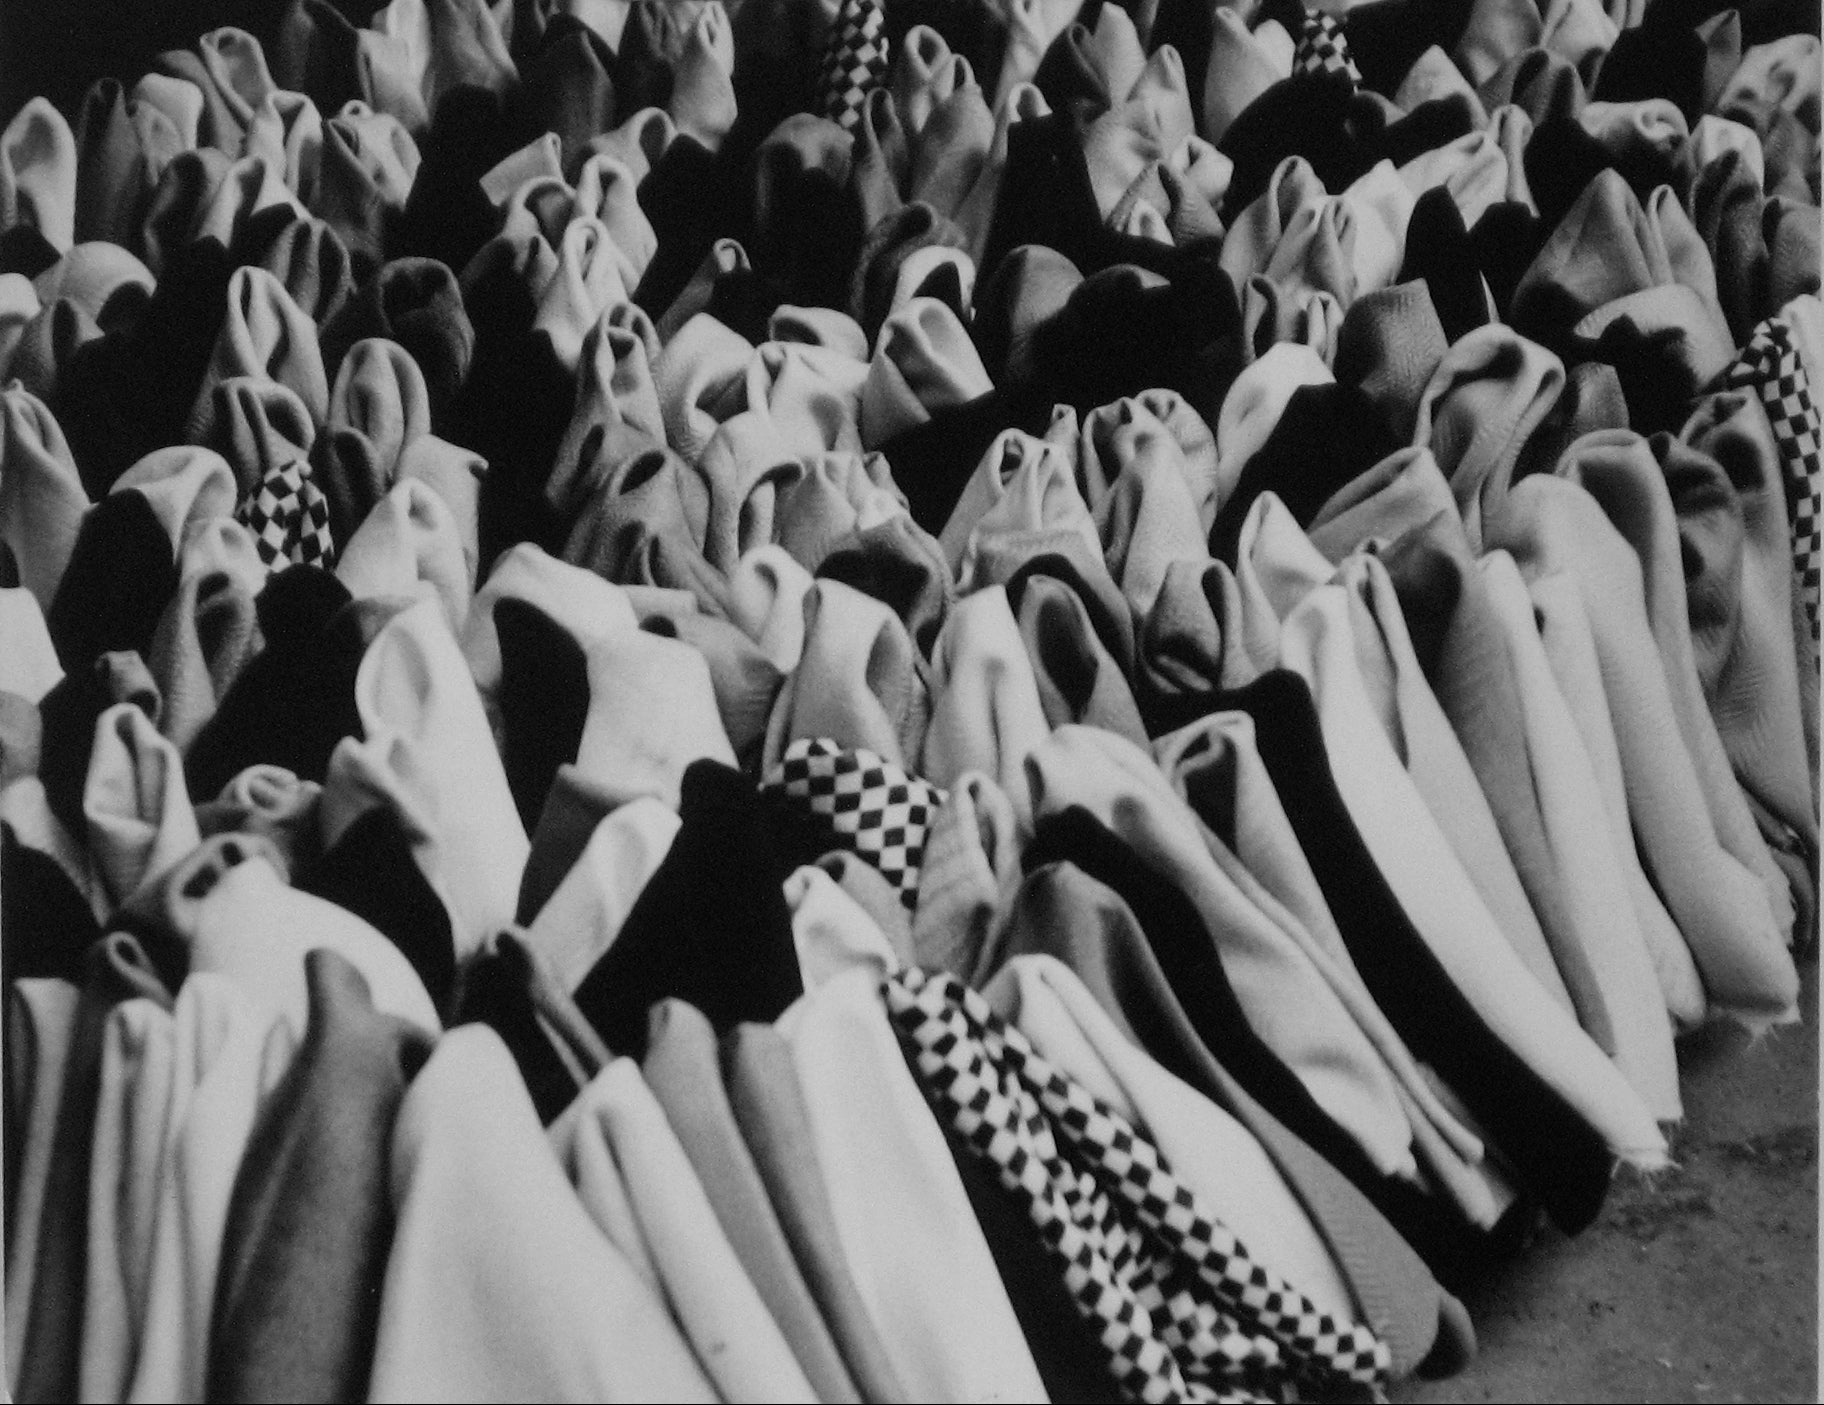 Rolled Fabric in an Istanbul Marketplace <br>1960s Photograph <br><br>#12161